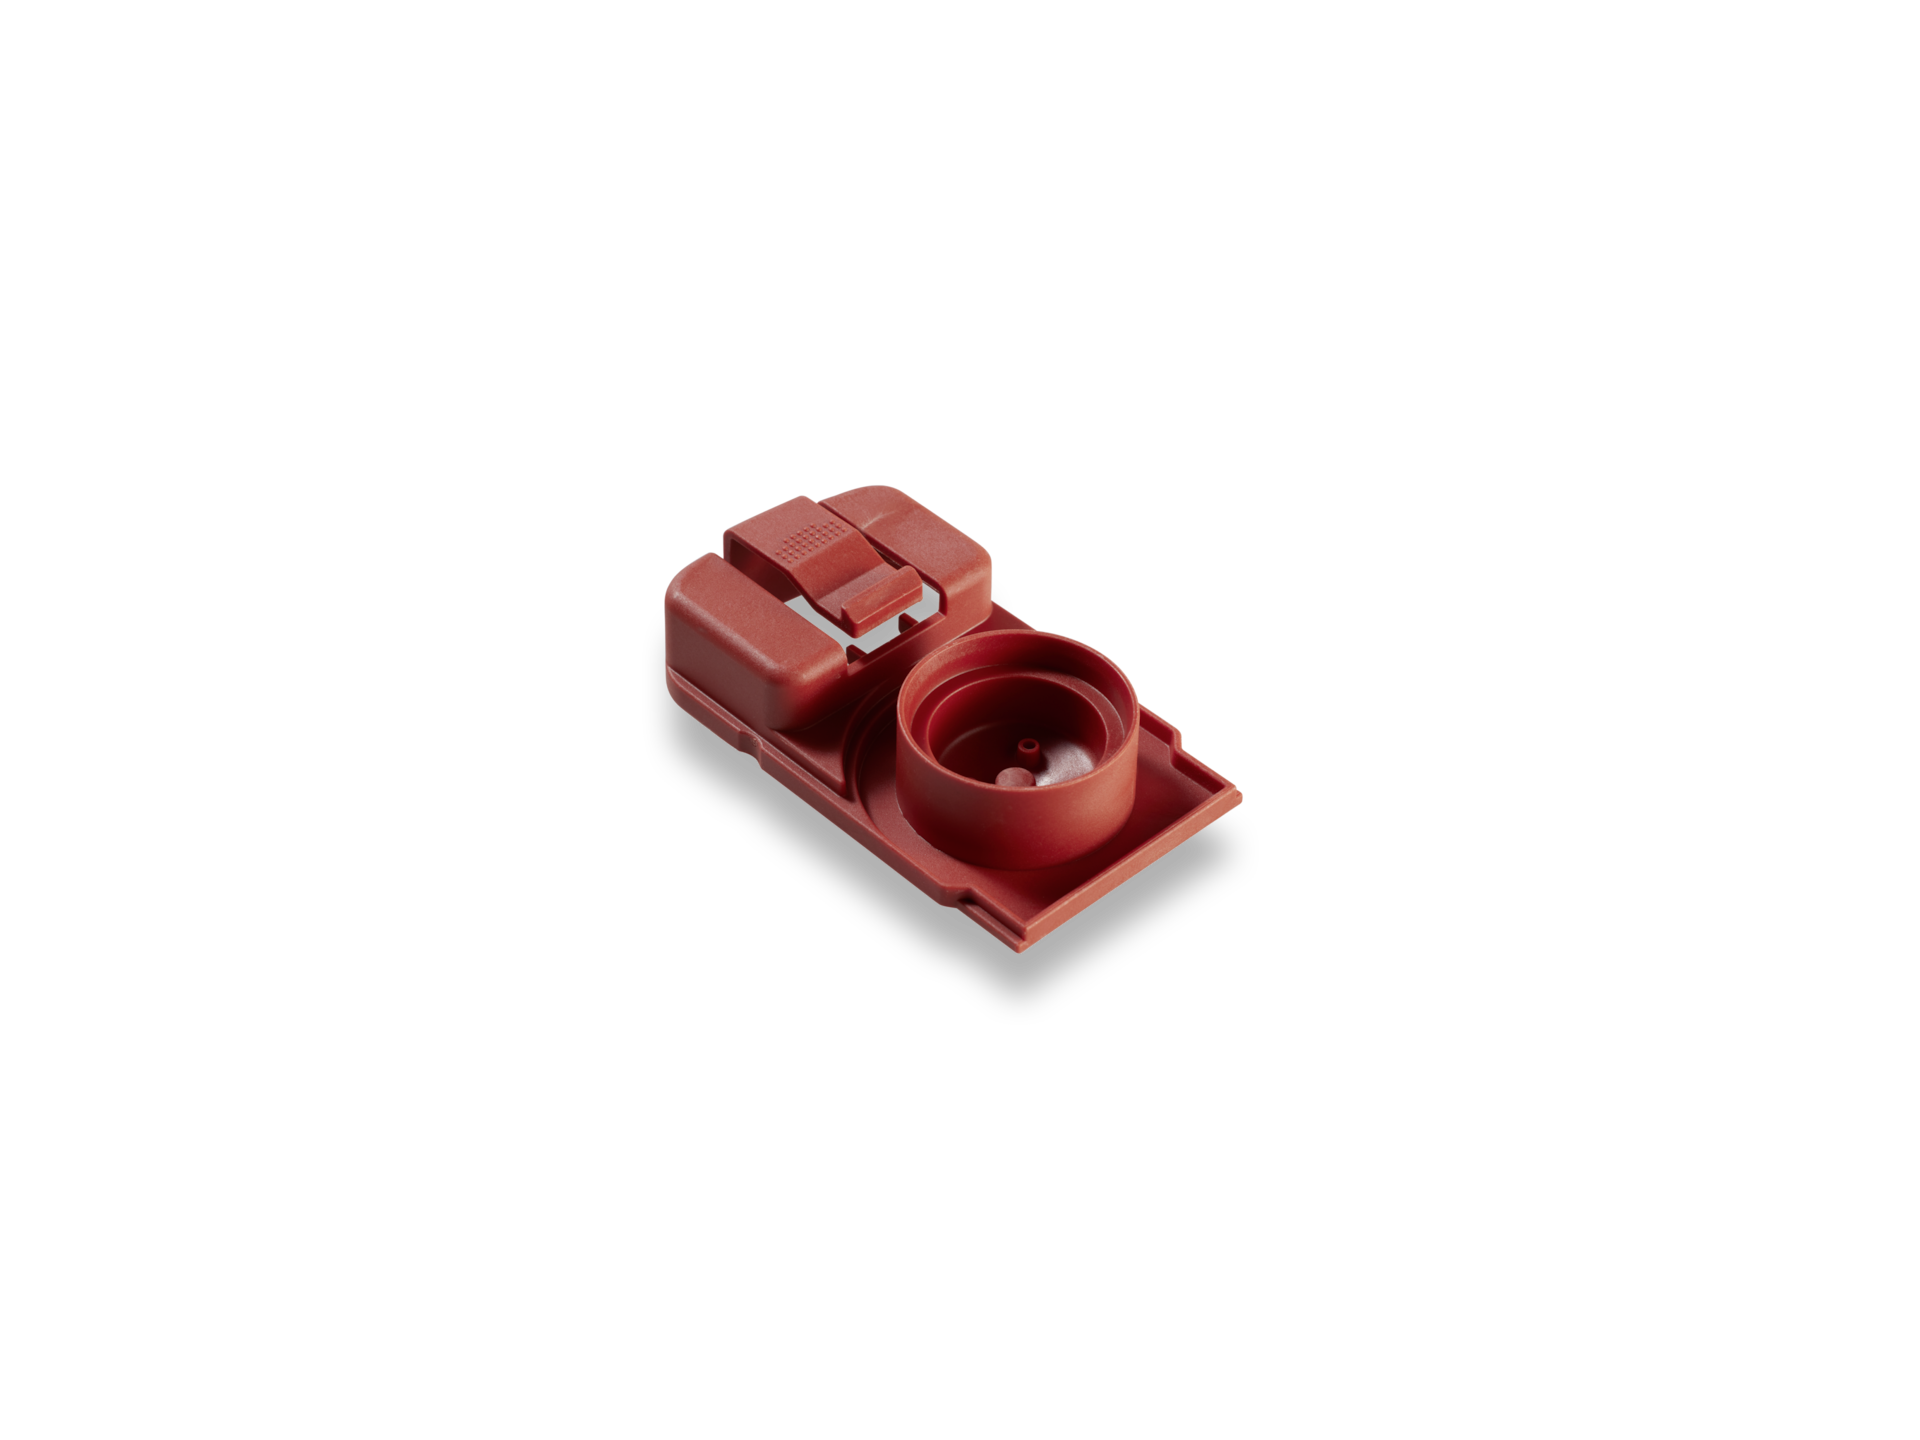 Spare parts - Domestic - Bracket red - 3